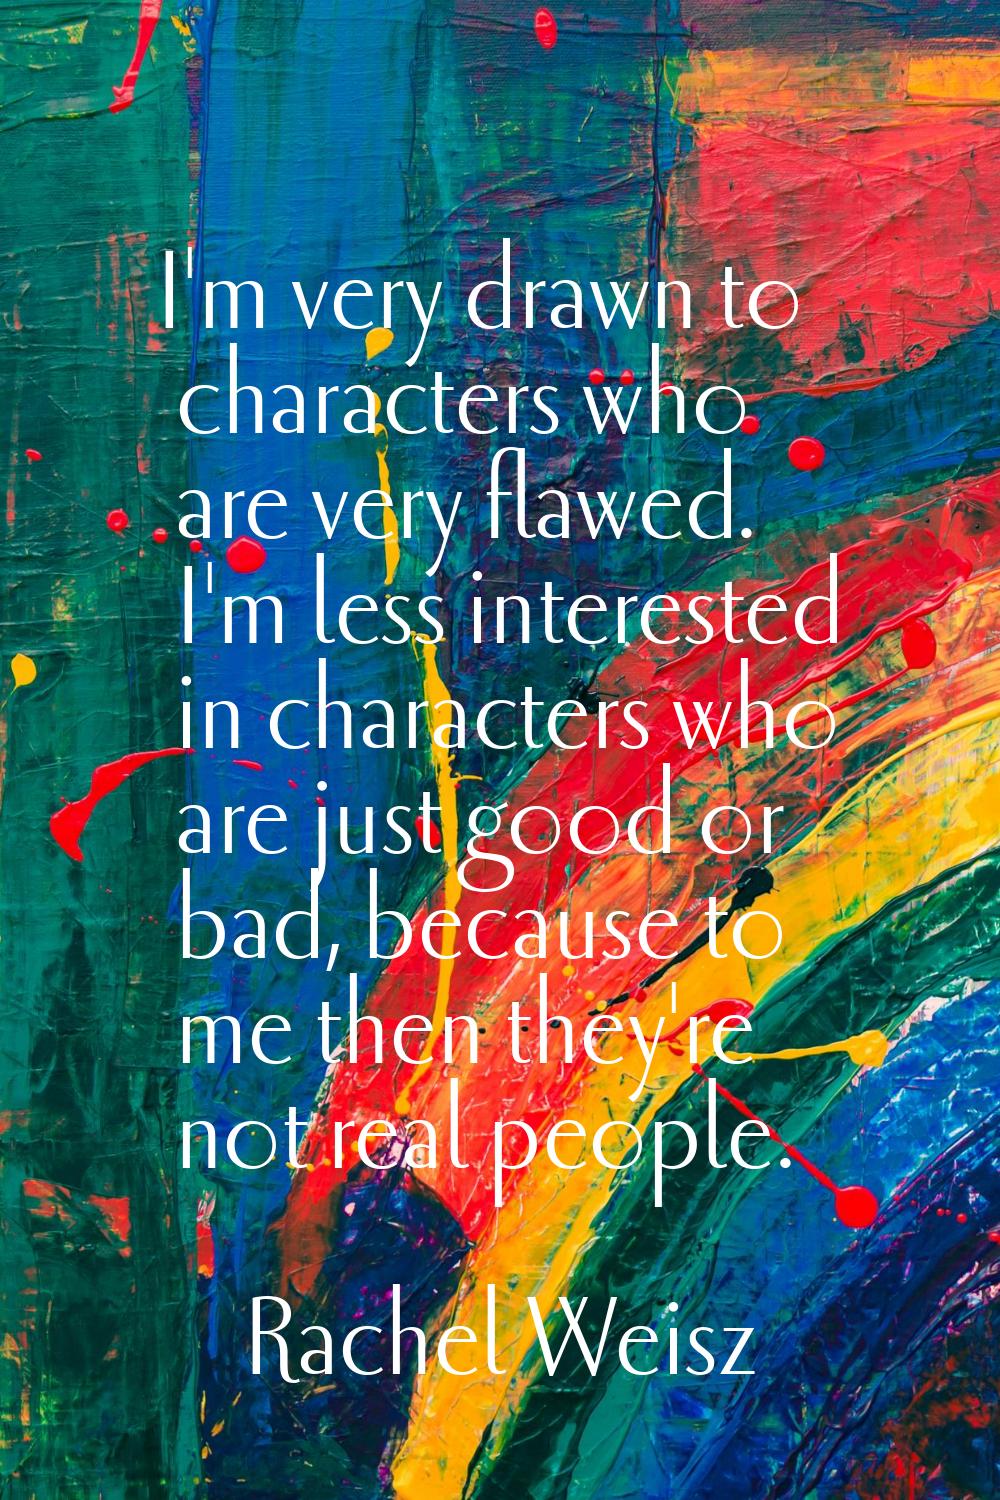 I'm very drawn to characters who are very flawed. I'm less interested in characters who are just go